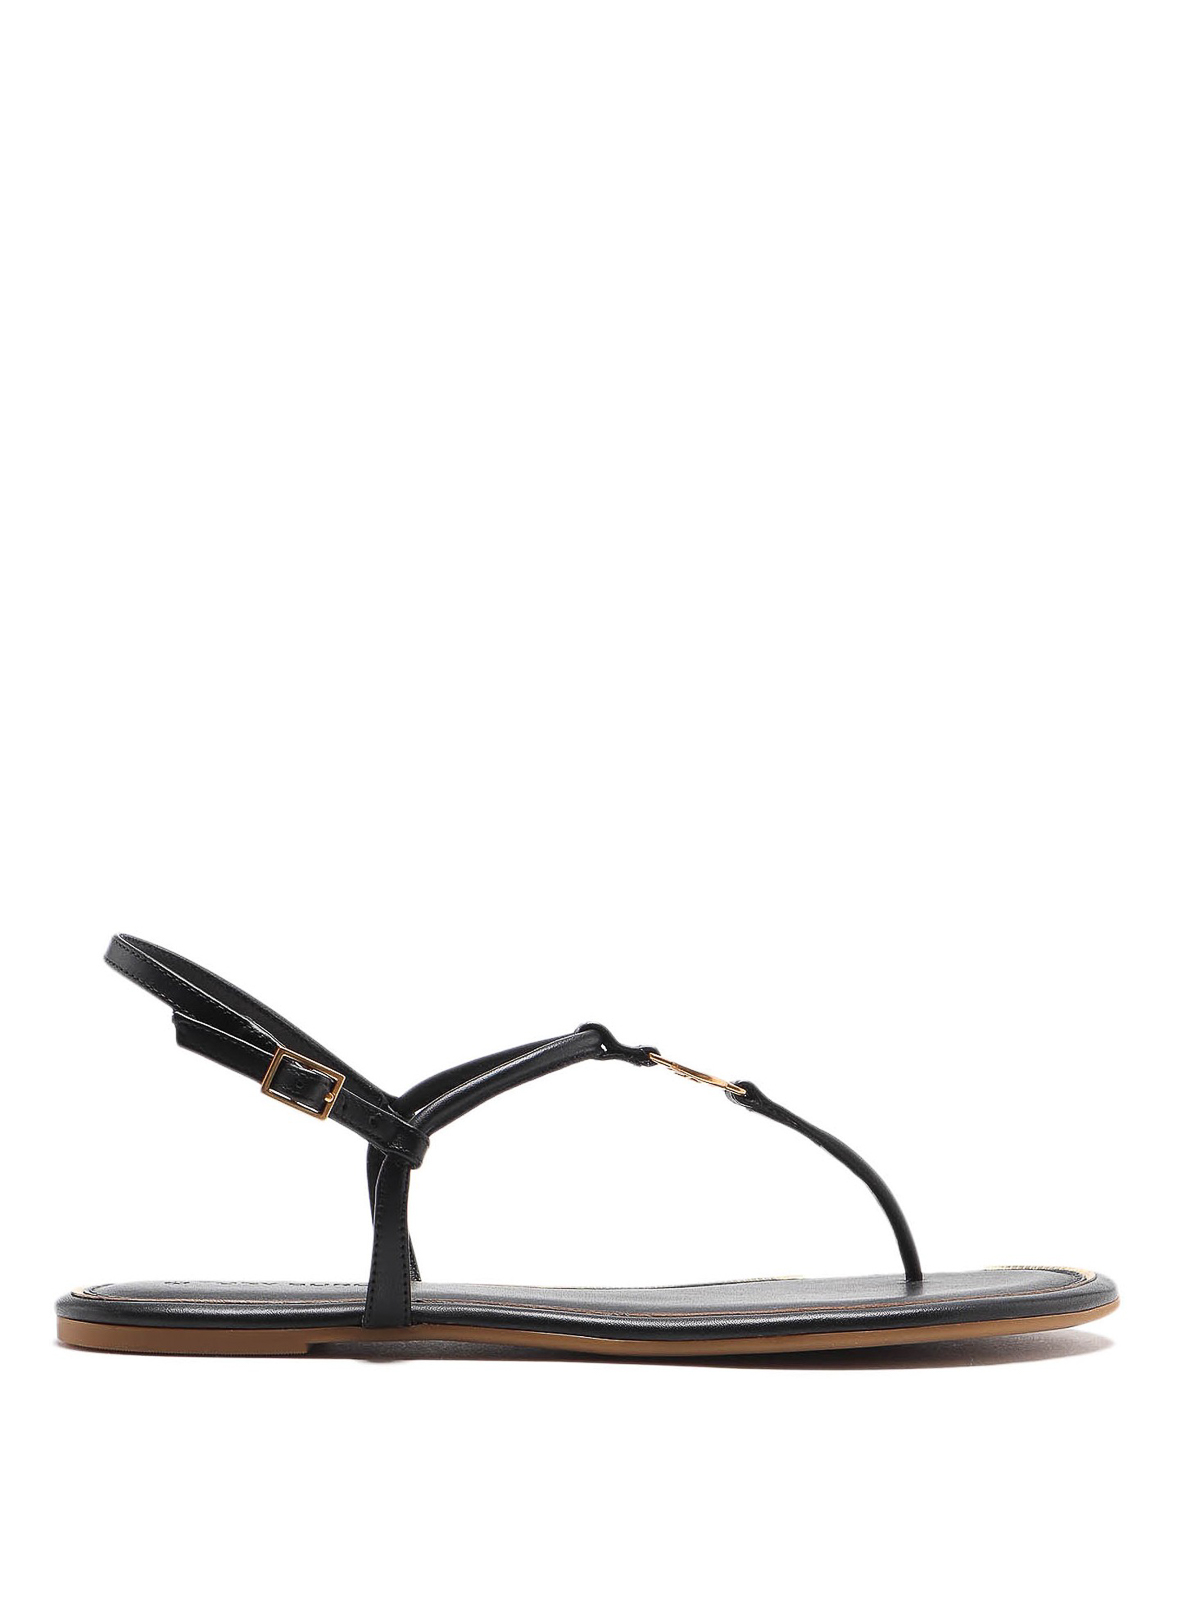 Sandals Tory Burch - Emmy leather thong sandals - 63407006 